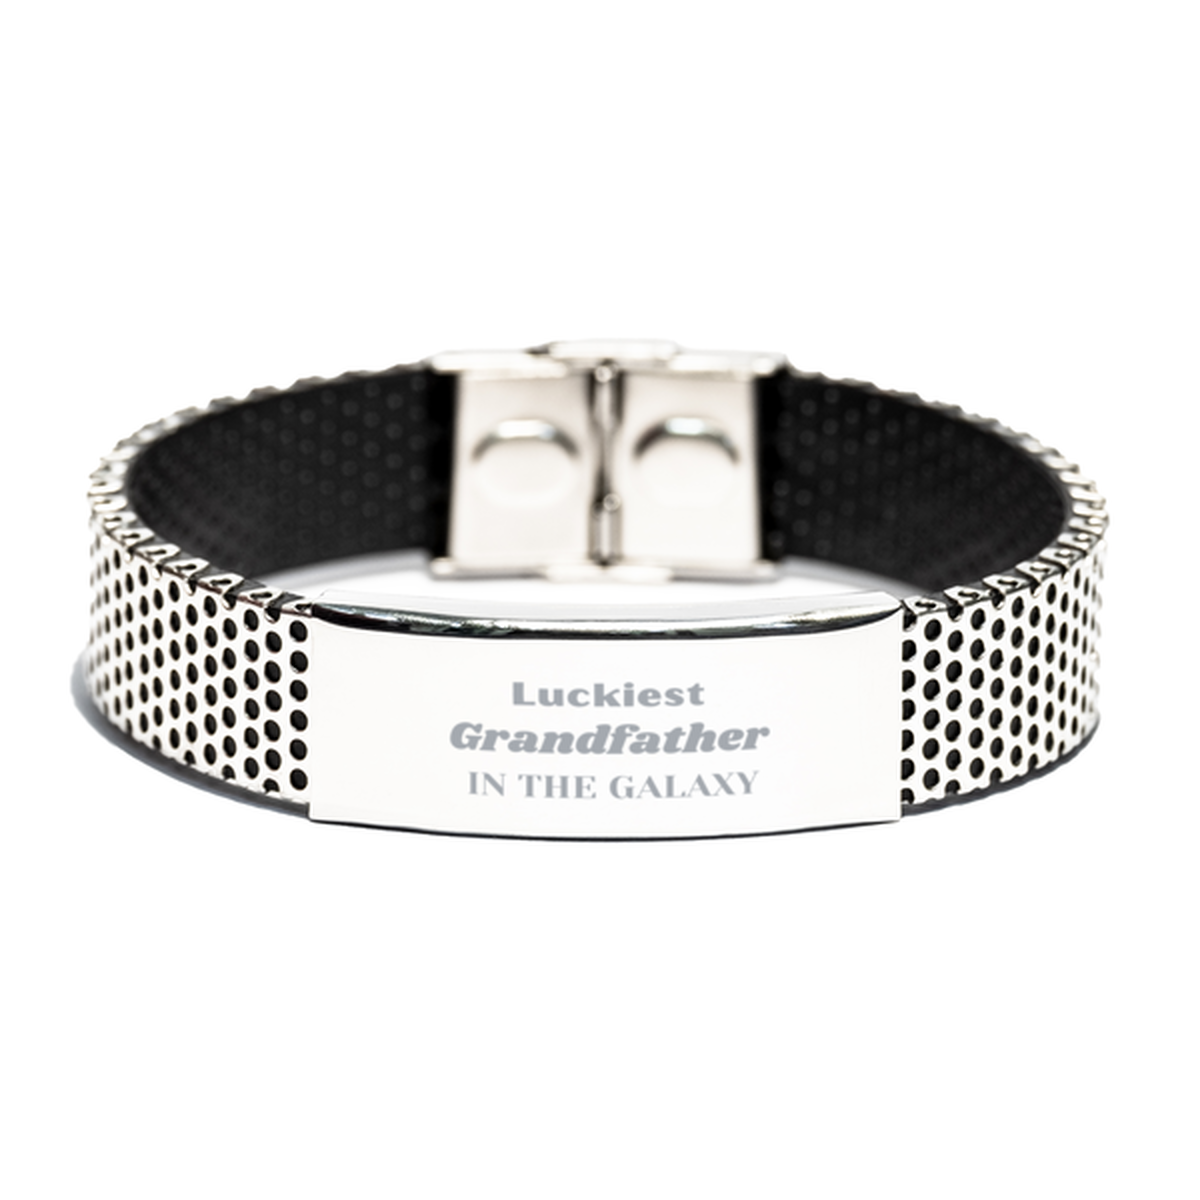 Luckiest Grandfather in the Galaxy, To My Grandfather Engraved Gifts, Christmas Grandfather Stainless Steel Bracelet Gifts, X-mas Birthday Unique Gifts For Grandfather Men Women